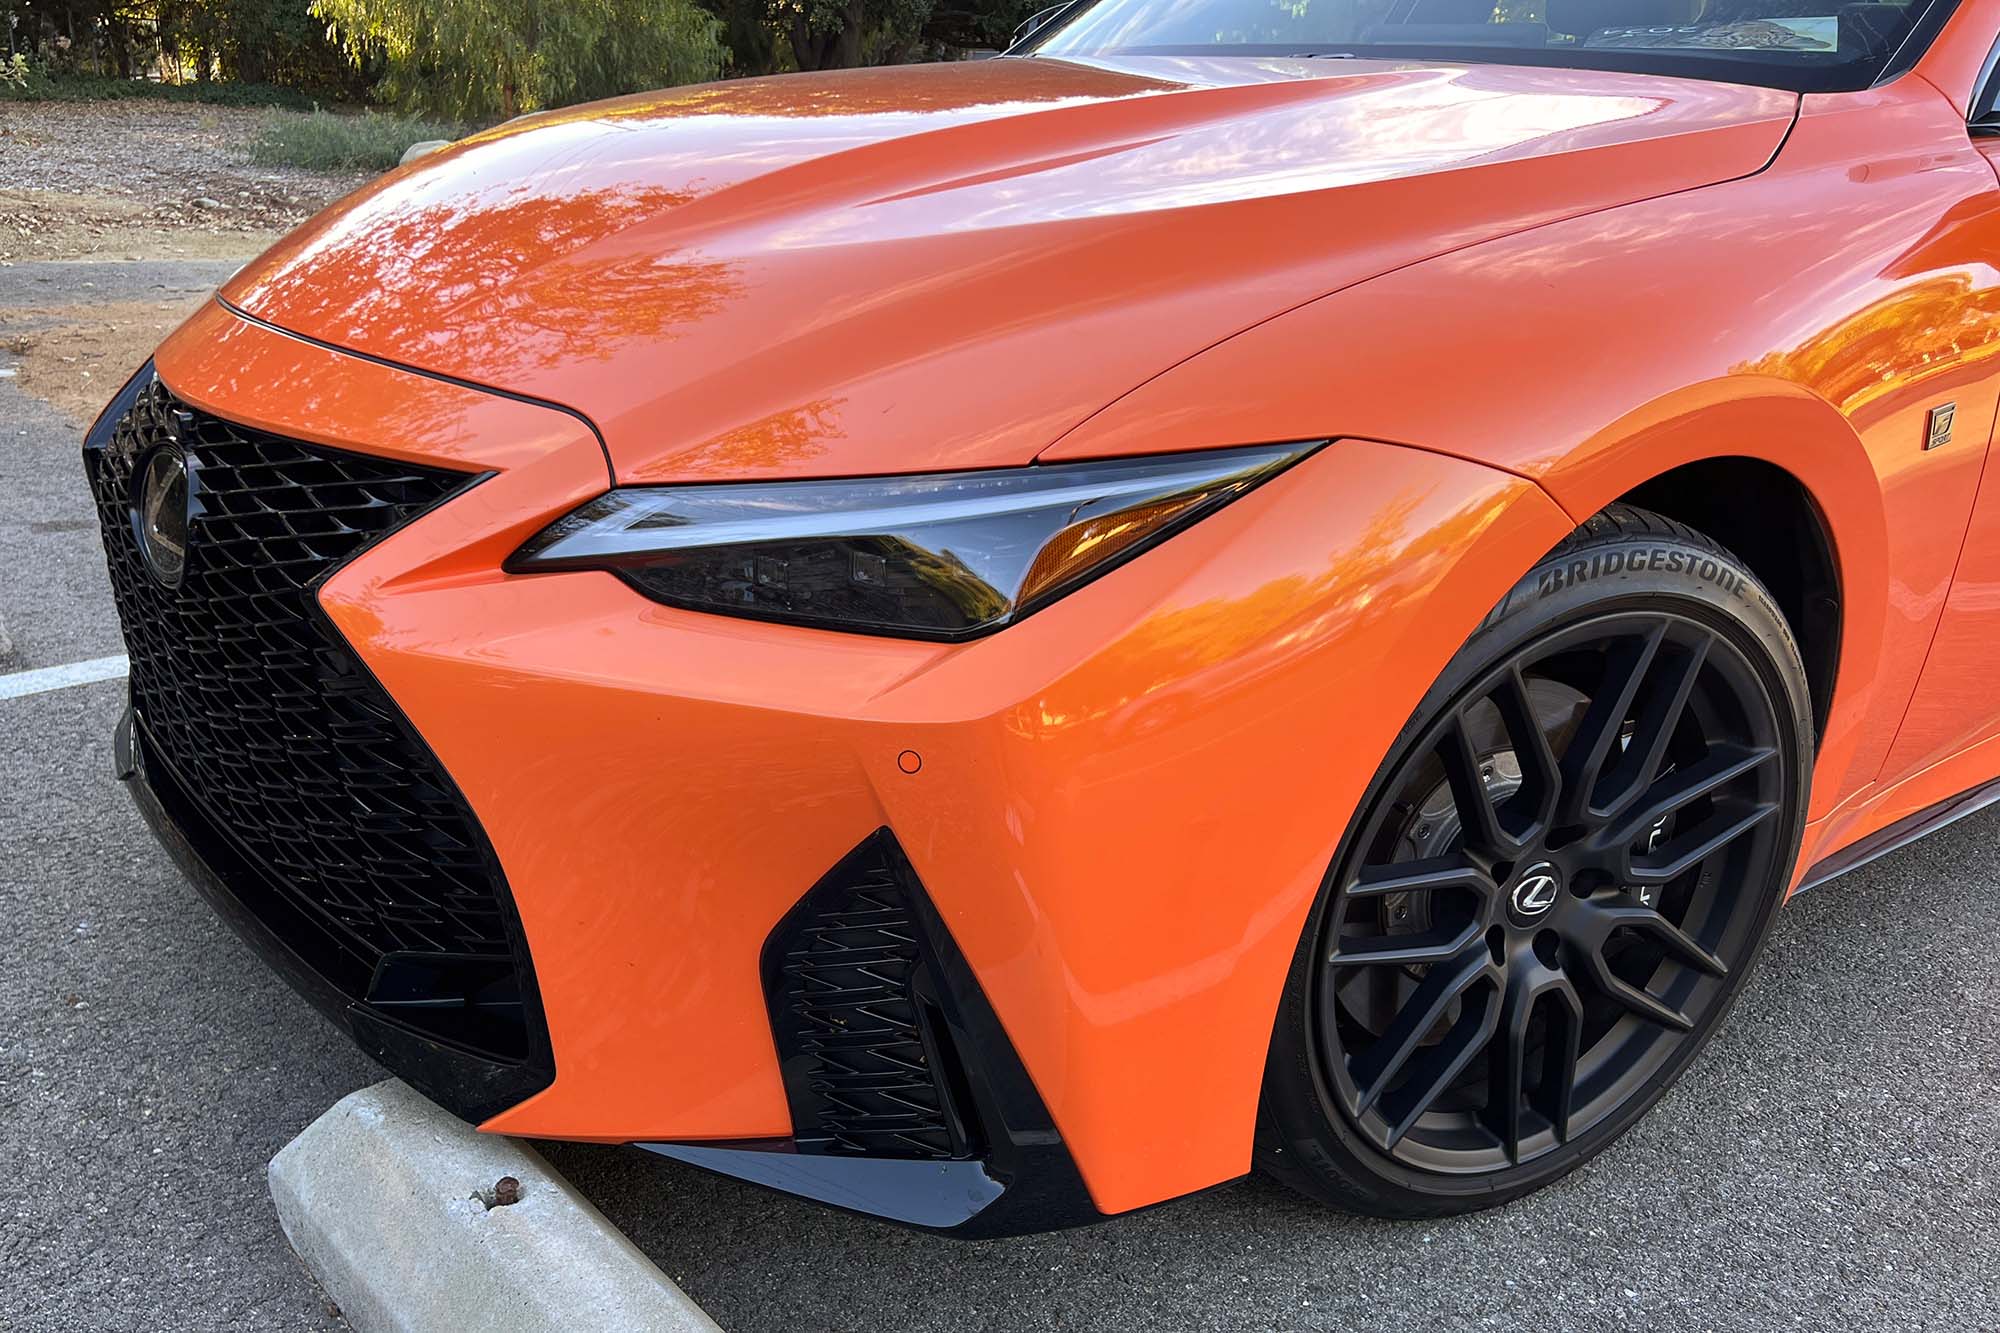 Detail view of an orange 2023 Lexus IS 500 front end over a parking curb